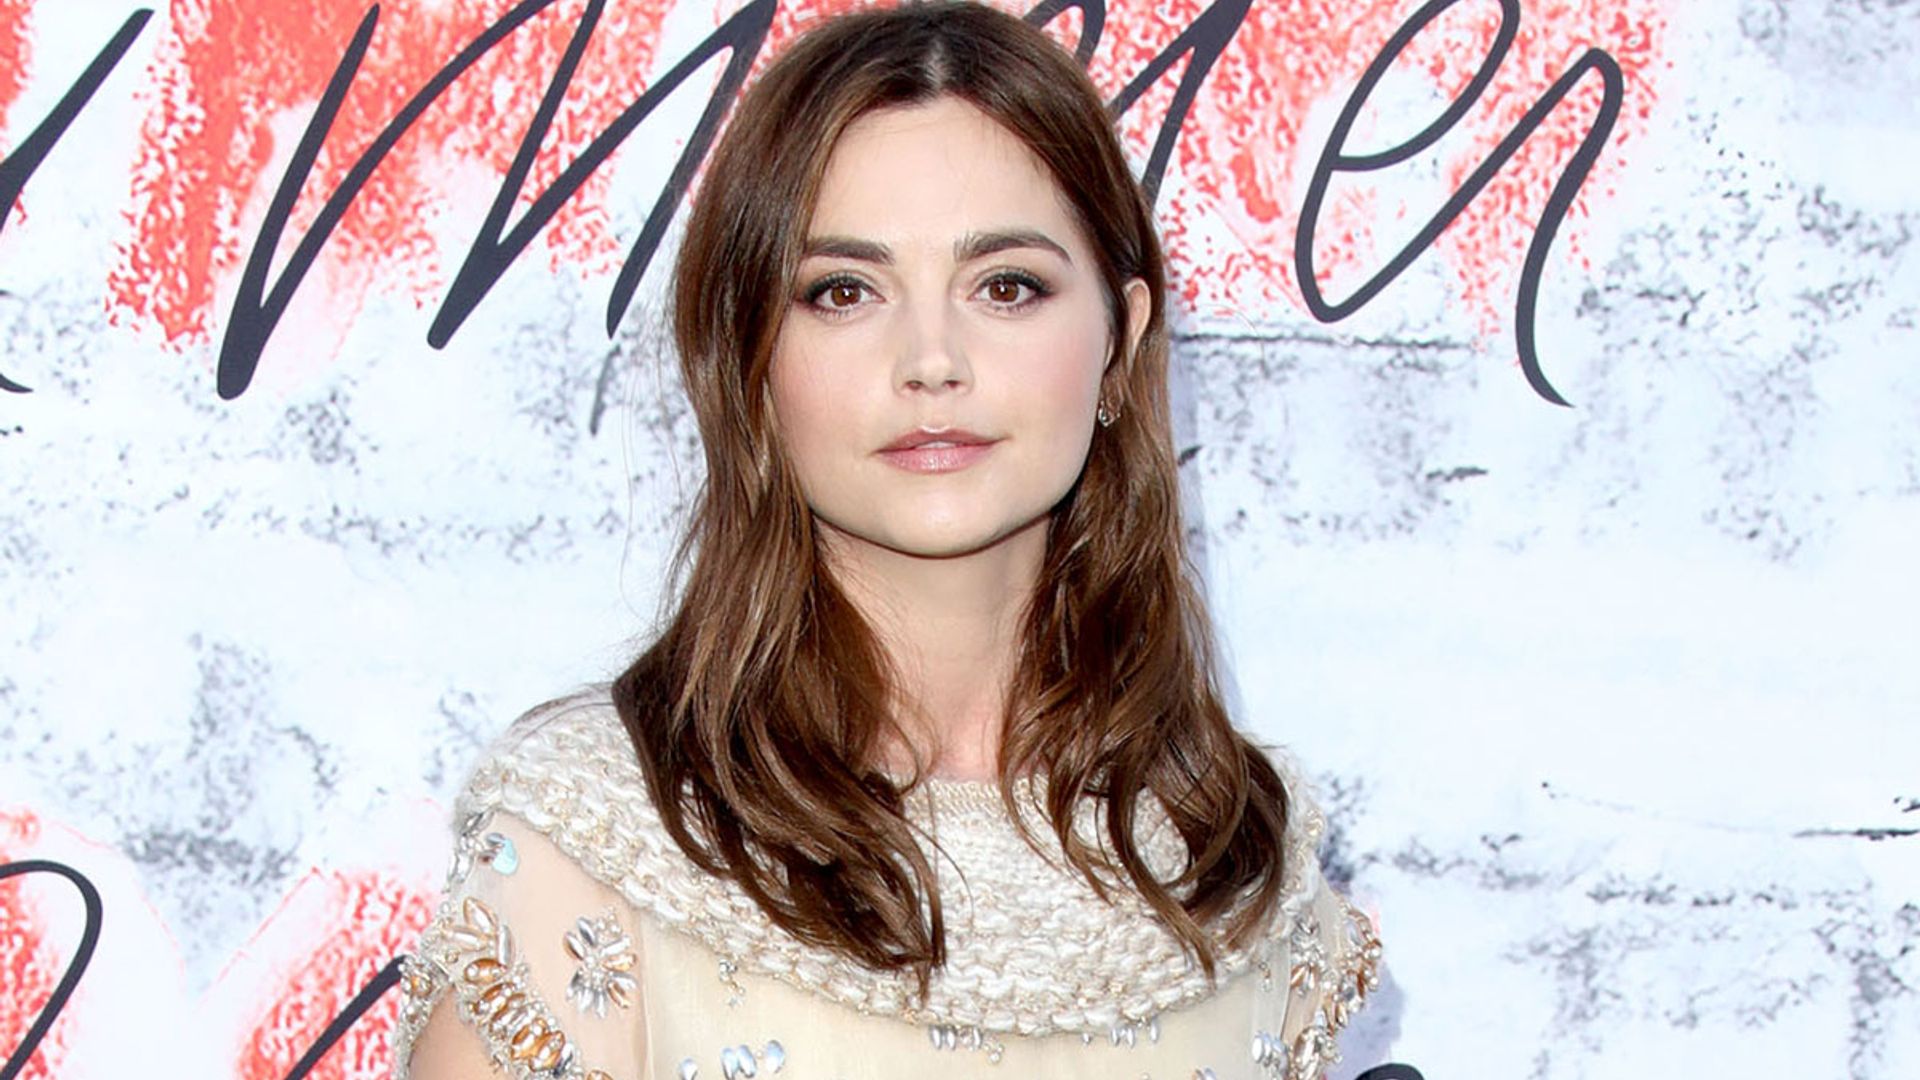 Jenna Coleman opens up about 'compelling' new role in upcoming TV drama